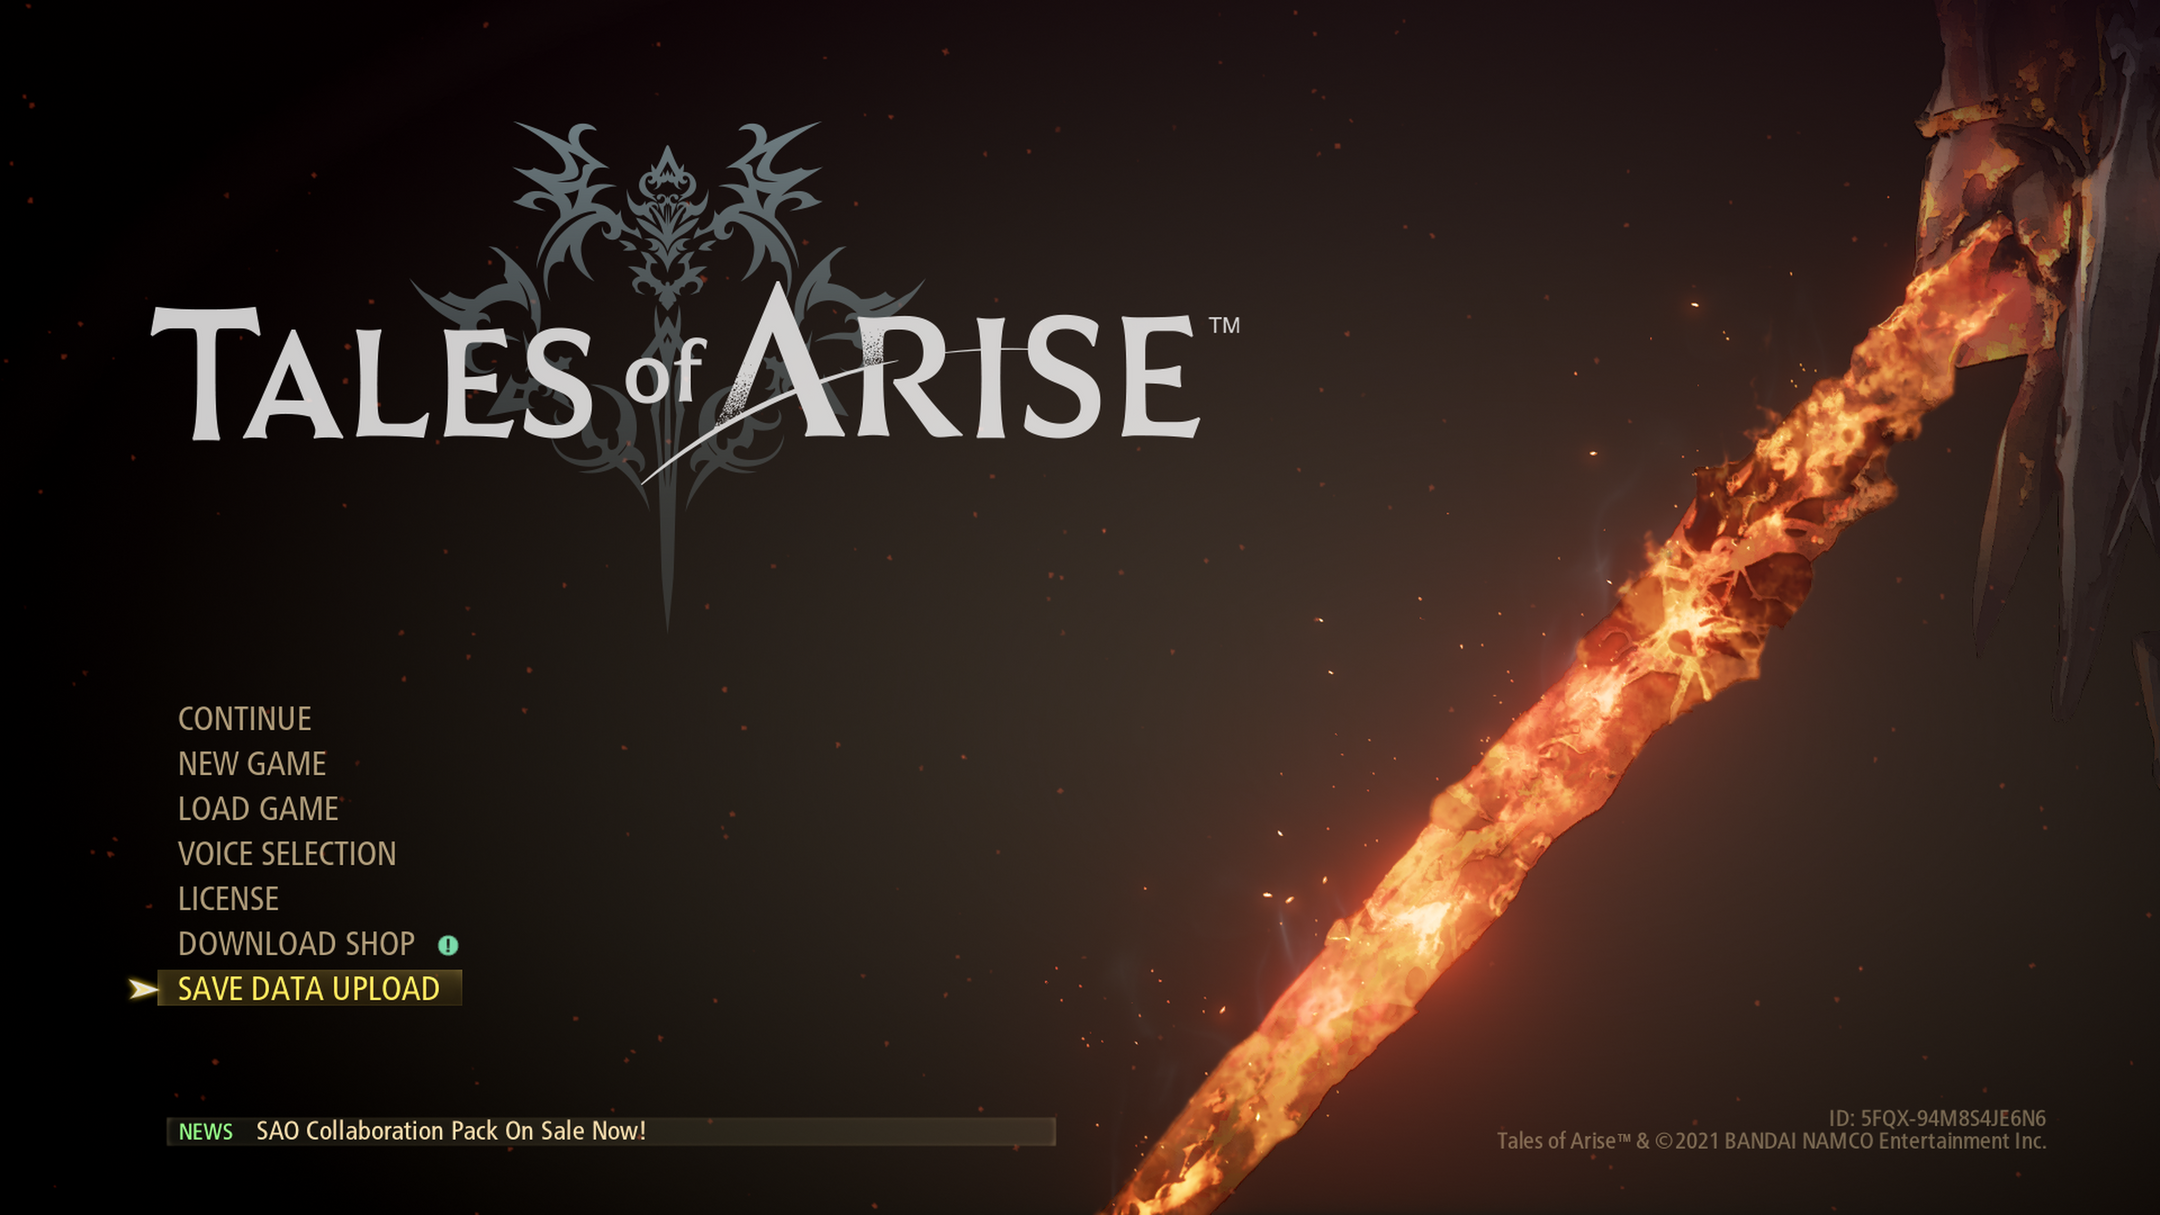 Tales of Arise - Save Data Upload